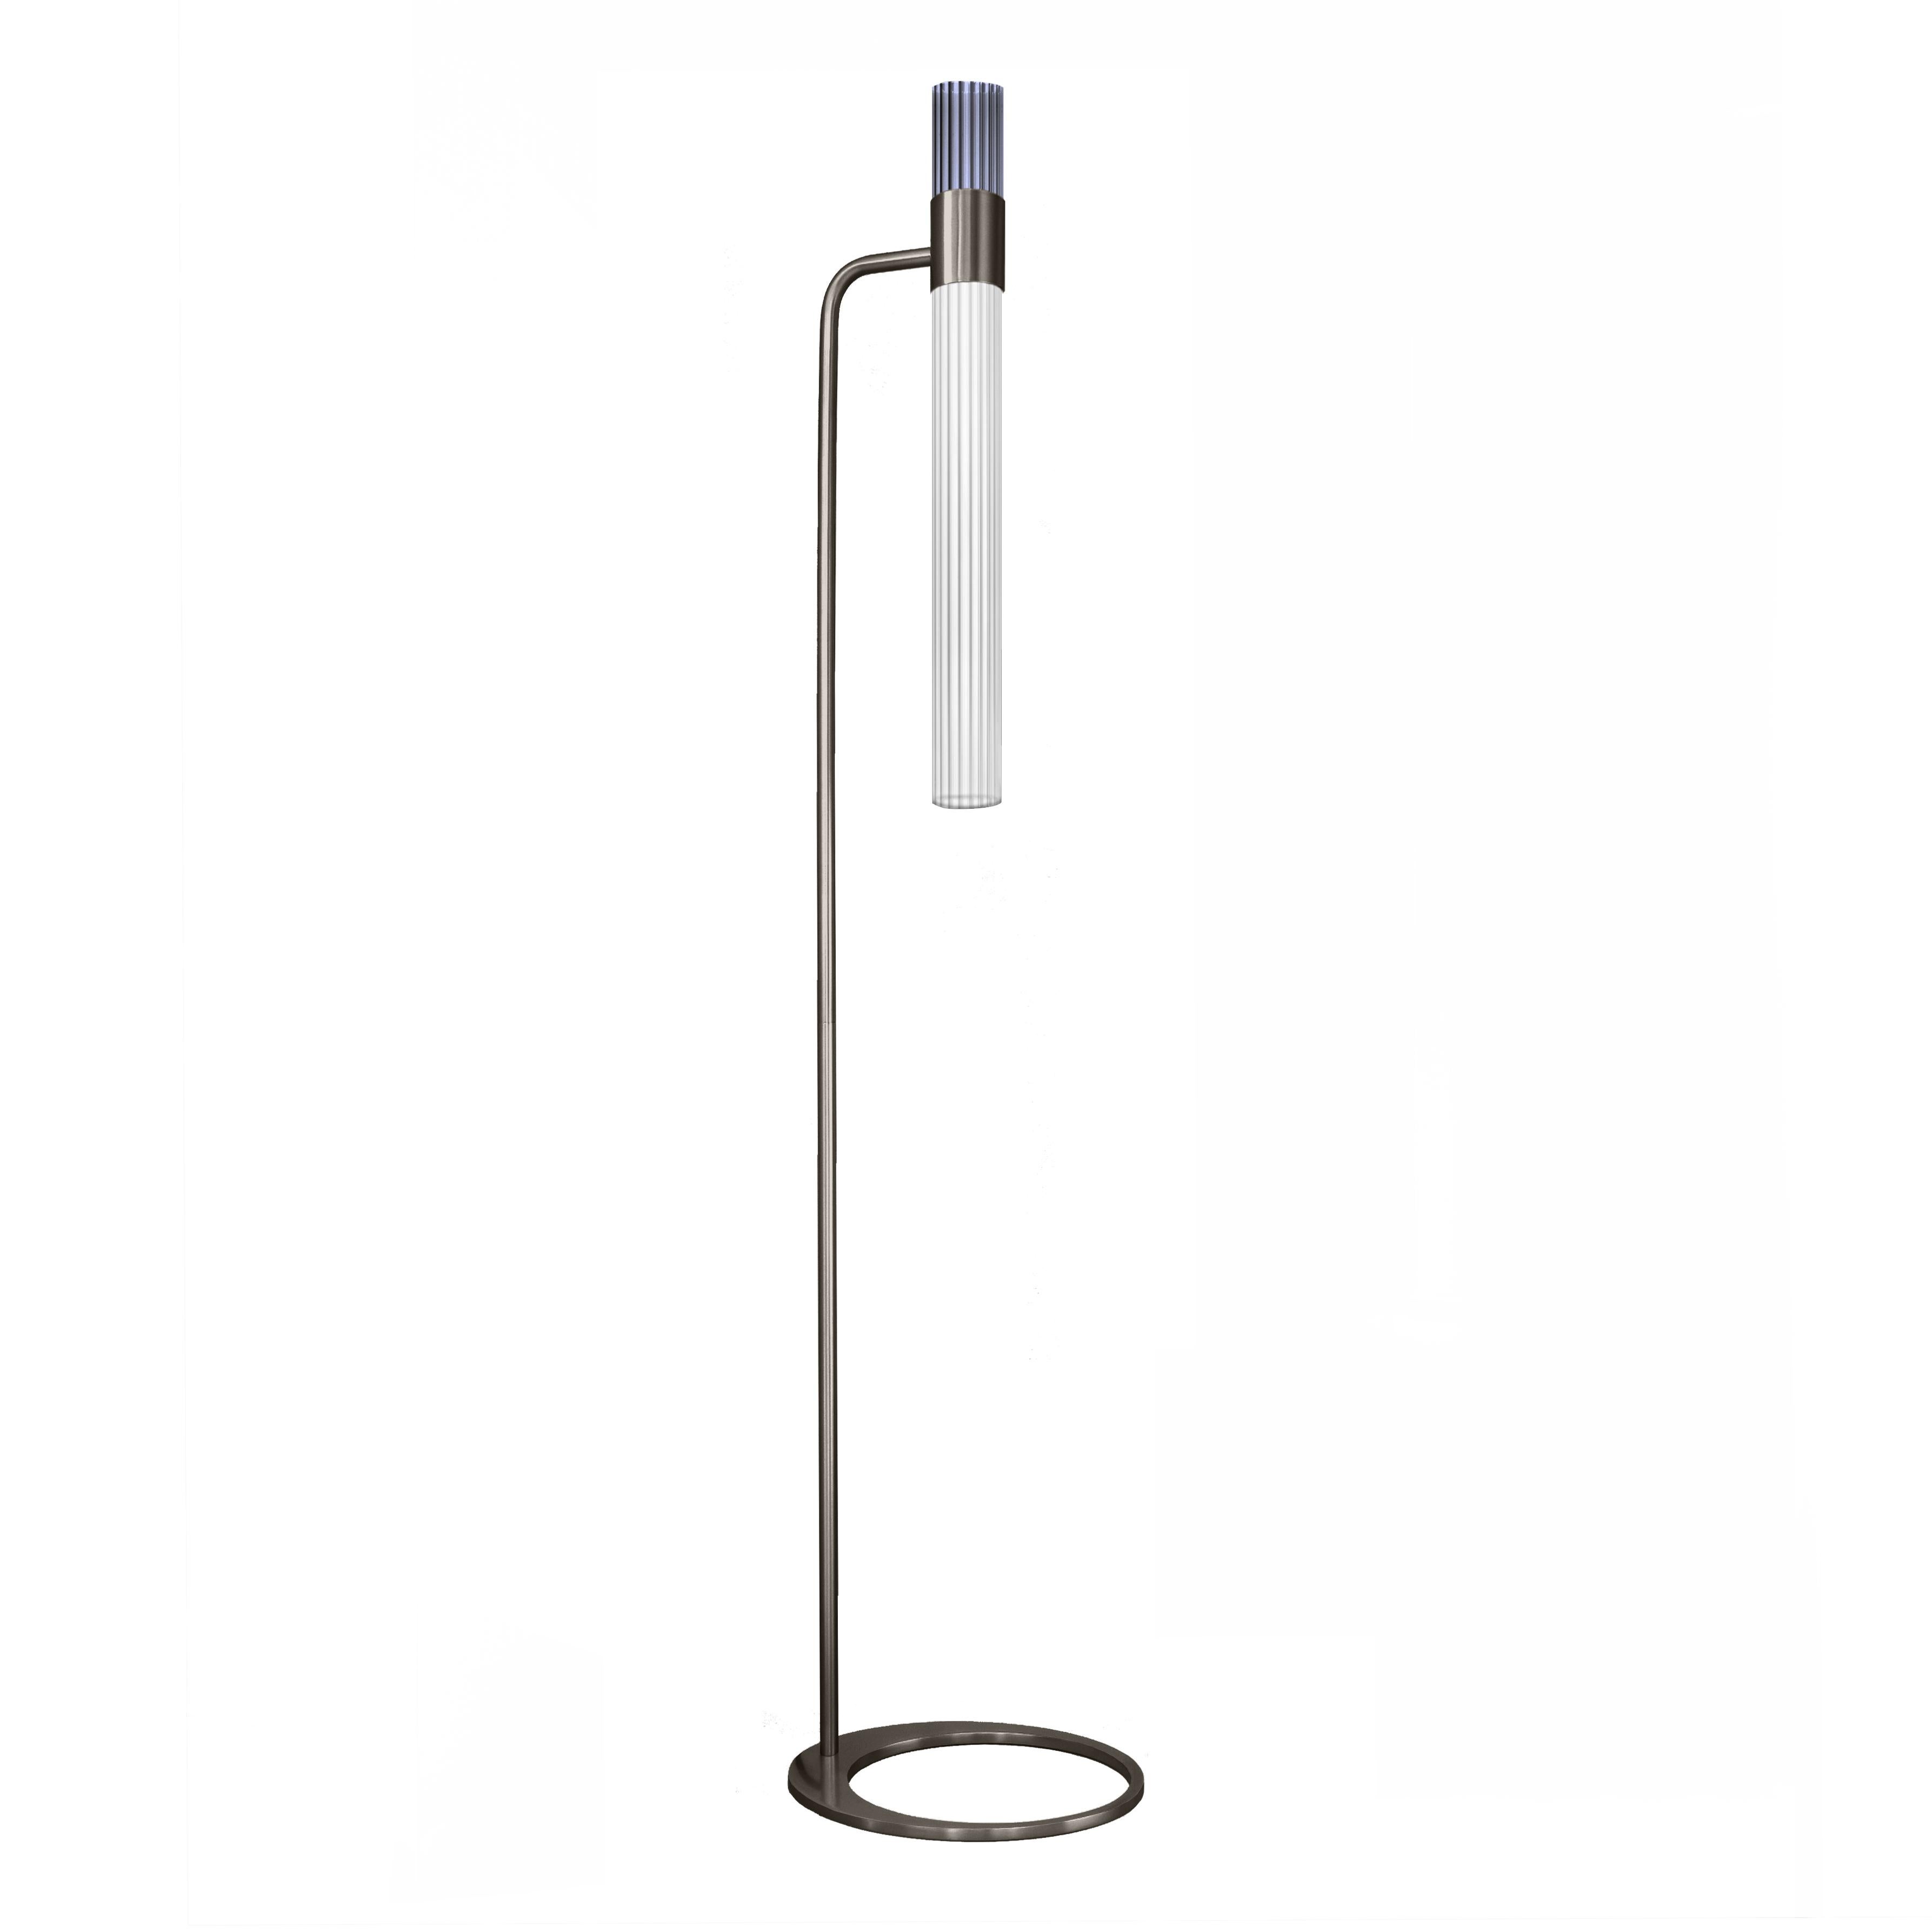 Sbarlusc floor lamp by Luce Tu
Dimensions: 149 x 32.5 cm
Materials: brass and glass

Sbarlusc in Milanese dialect represents the sparkle of a precious and very bright object. The colored glasses, which combine with each other creating games of